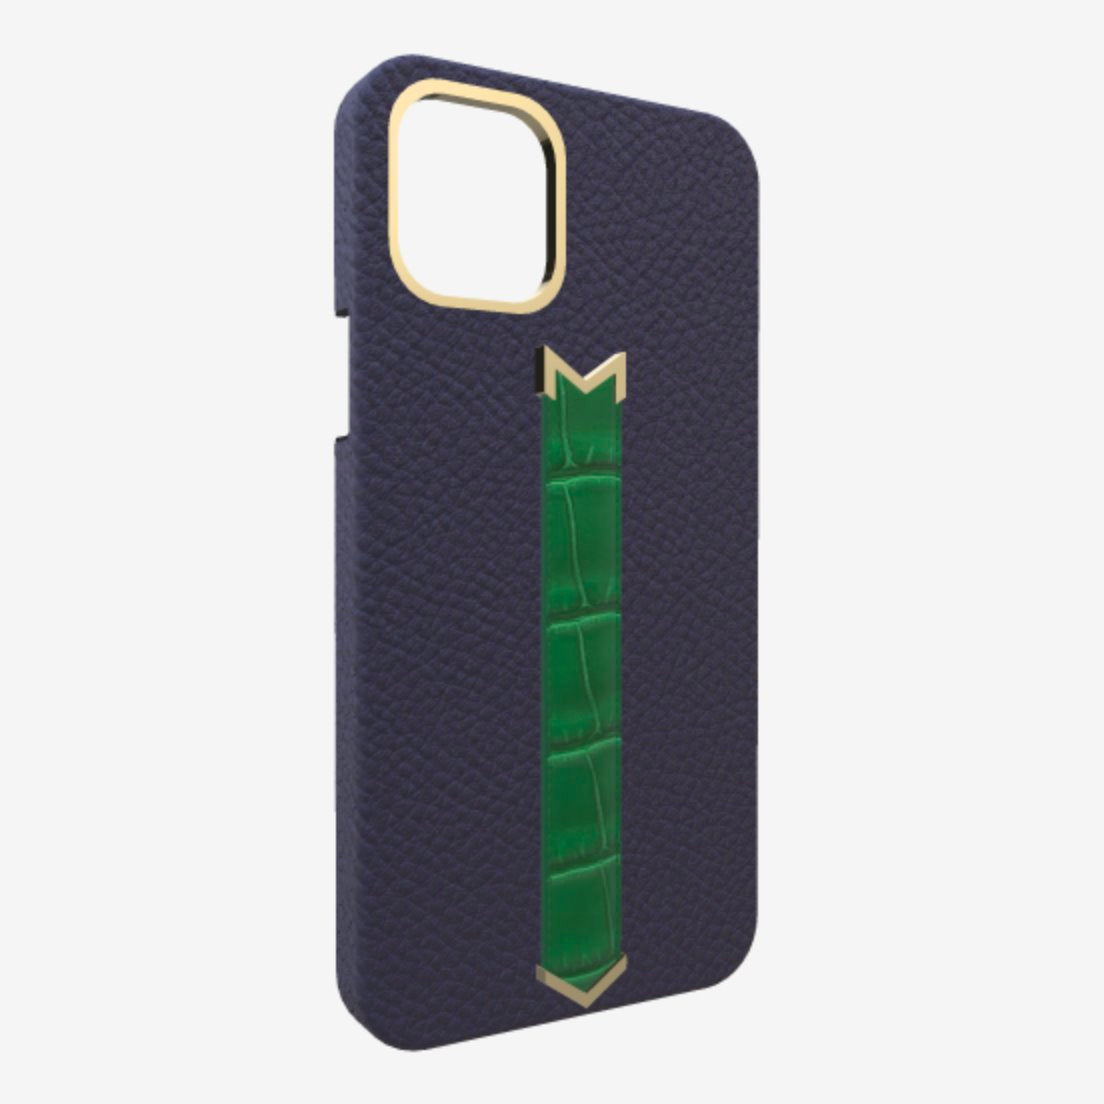 Gold Finger Strap Case for iPhone 13 Pro Max in Genuine Calfskin and Alligator Navy Blue Emerald Green 